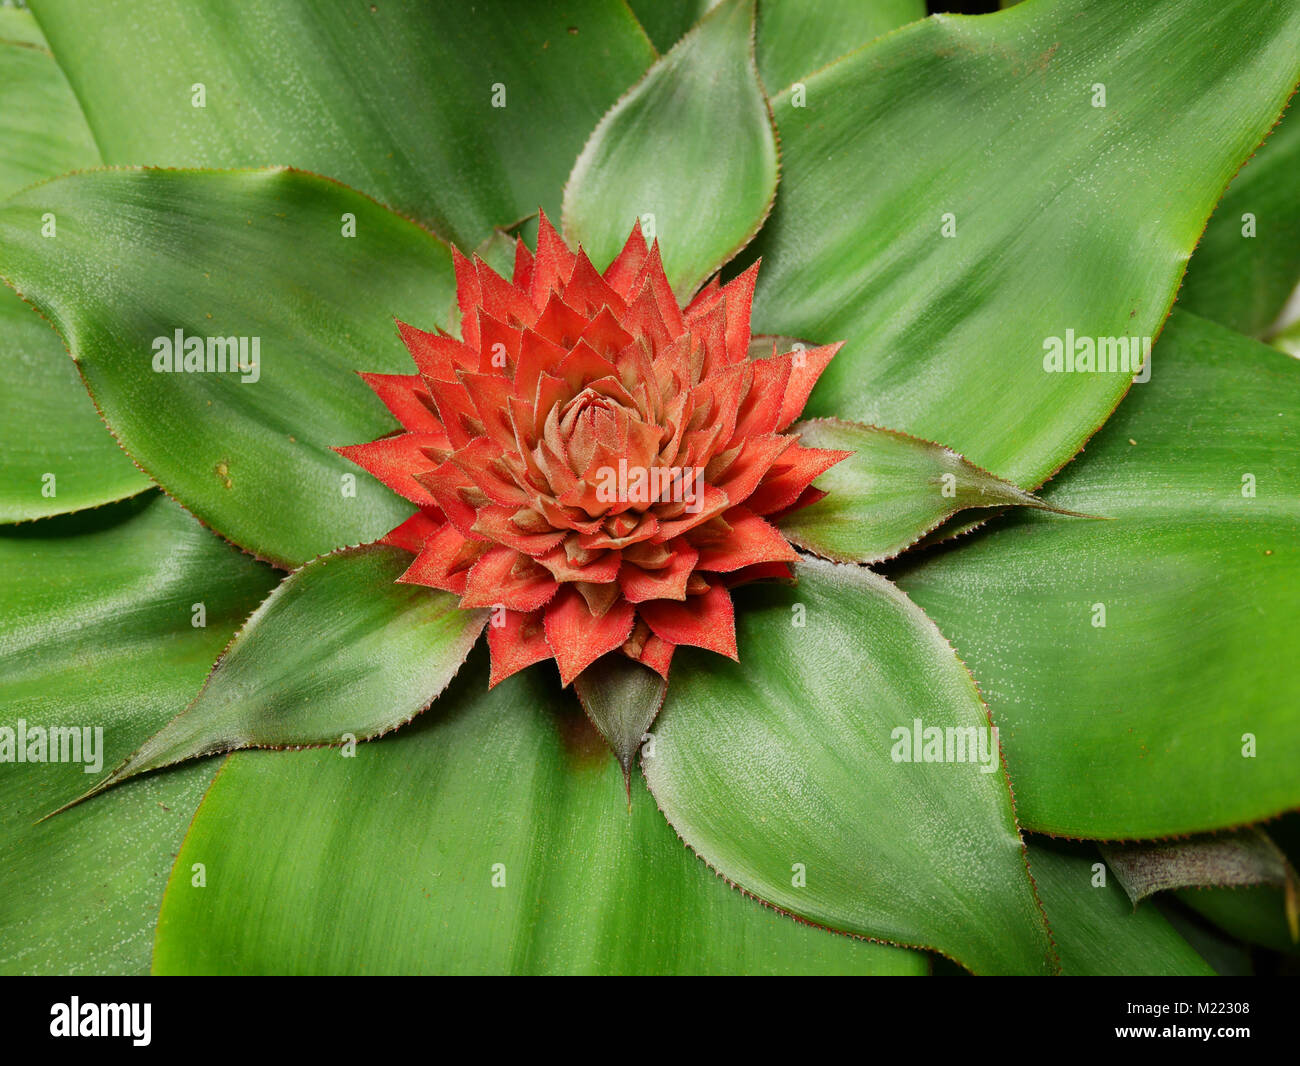 Close up of red Aechmea bromeliad flower on its green leaves. Native to Brazil, often grown as a houseplant Stock Photo